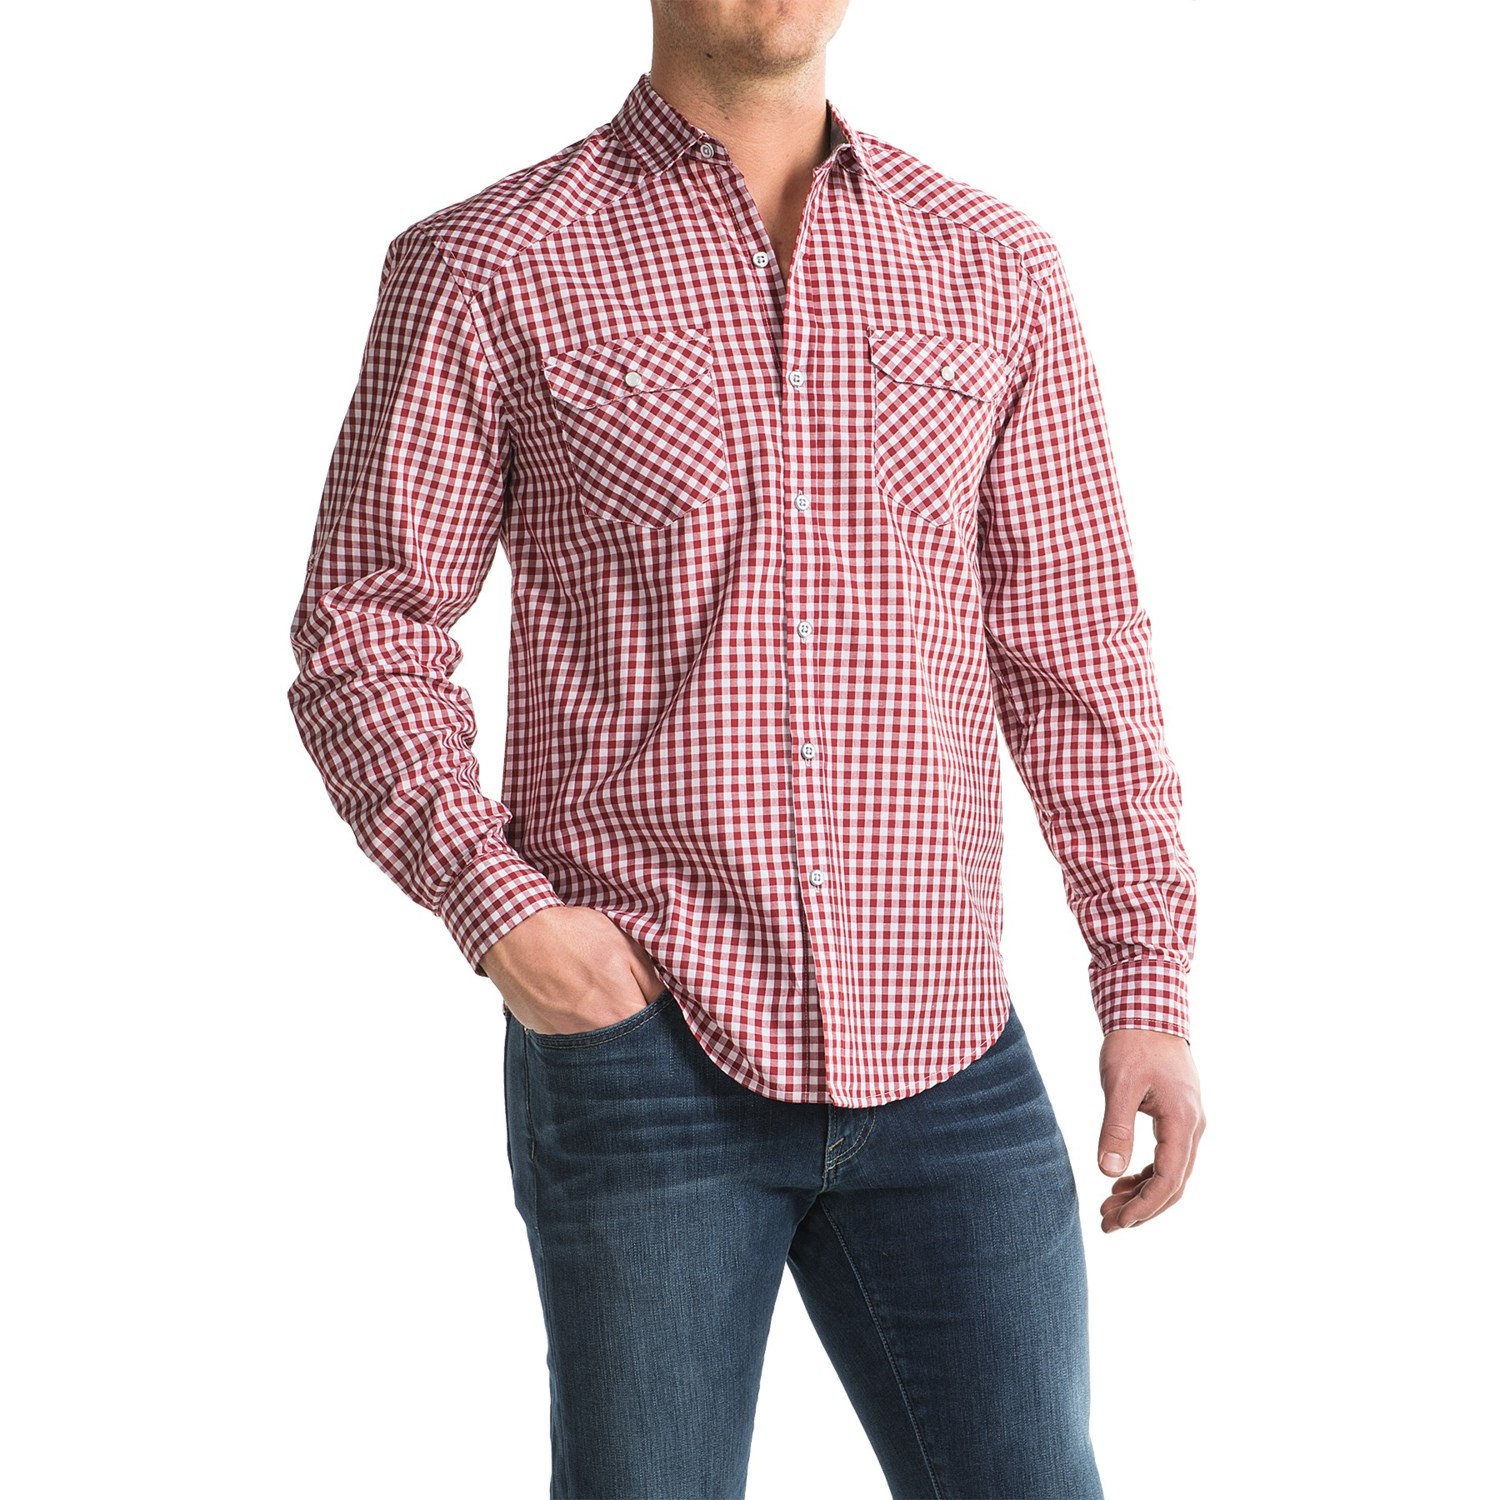 Bruno Gingham Button-Up Shirt (For Men) - Save 50%